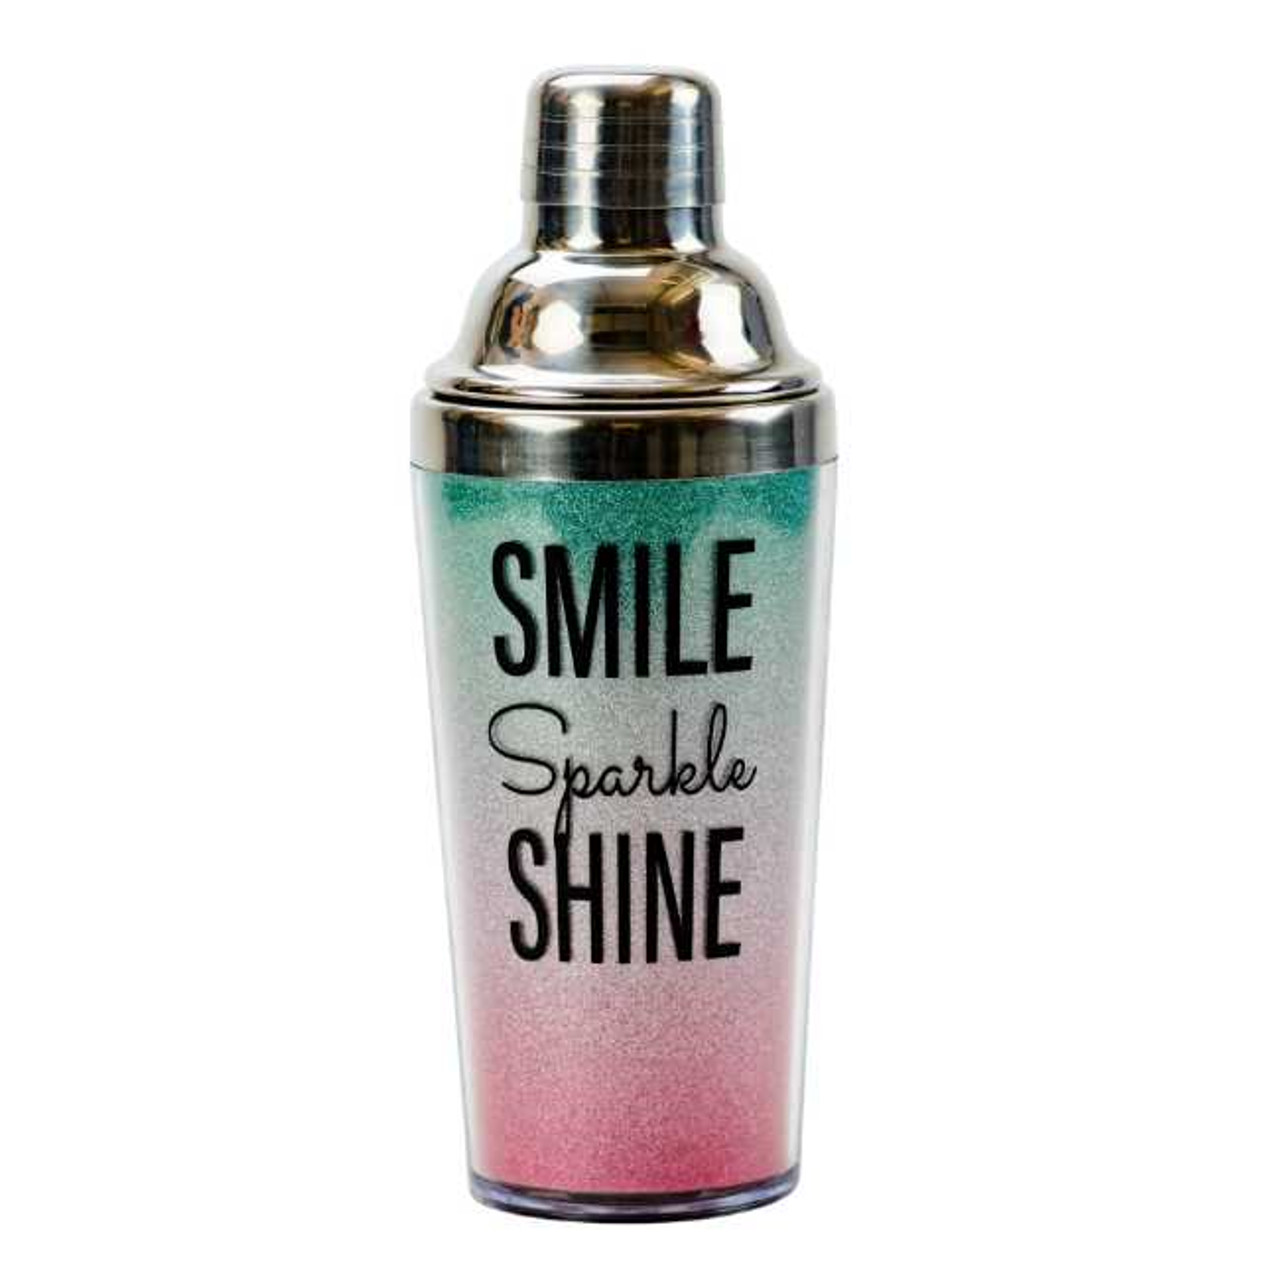 https://cdn11.bigcommerce.com/s-e0ctooh4/images/stencil/1280x1280/products/7562/20042/29791-Smile-Cocktail-Shaker__10717.1569772908.jpg?c=2